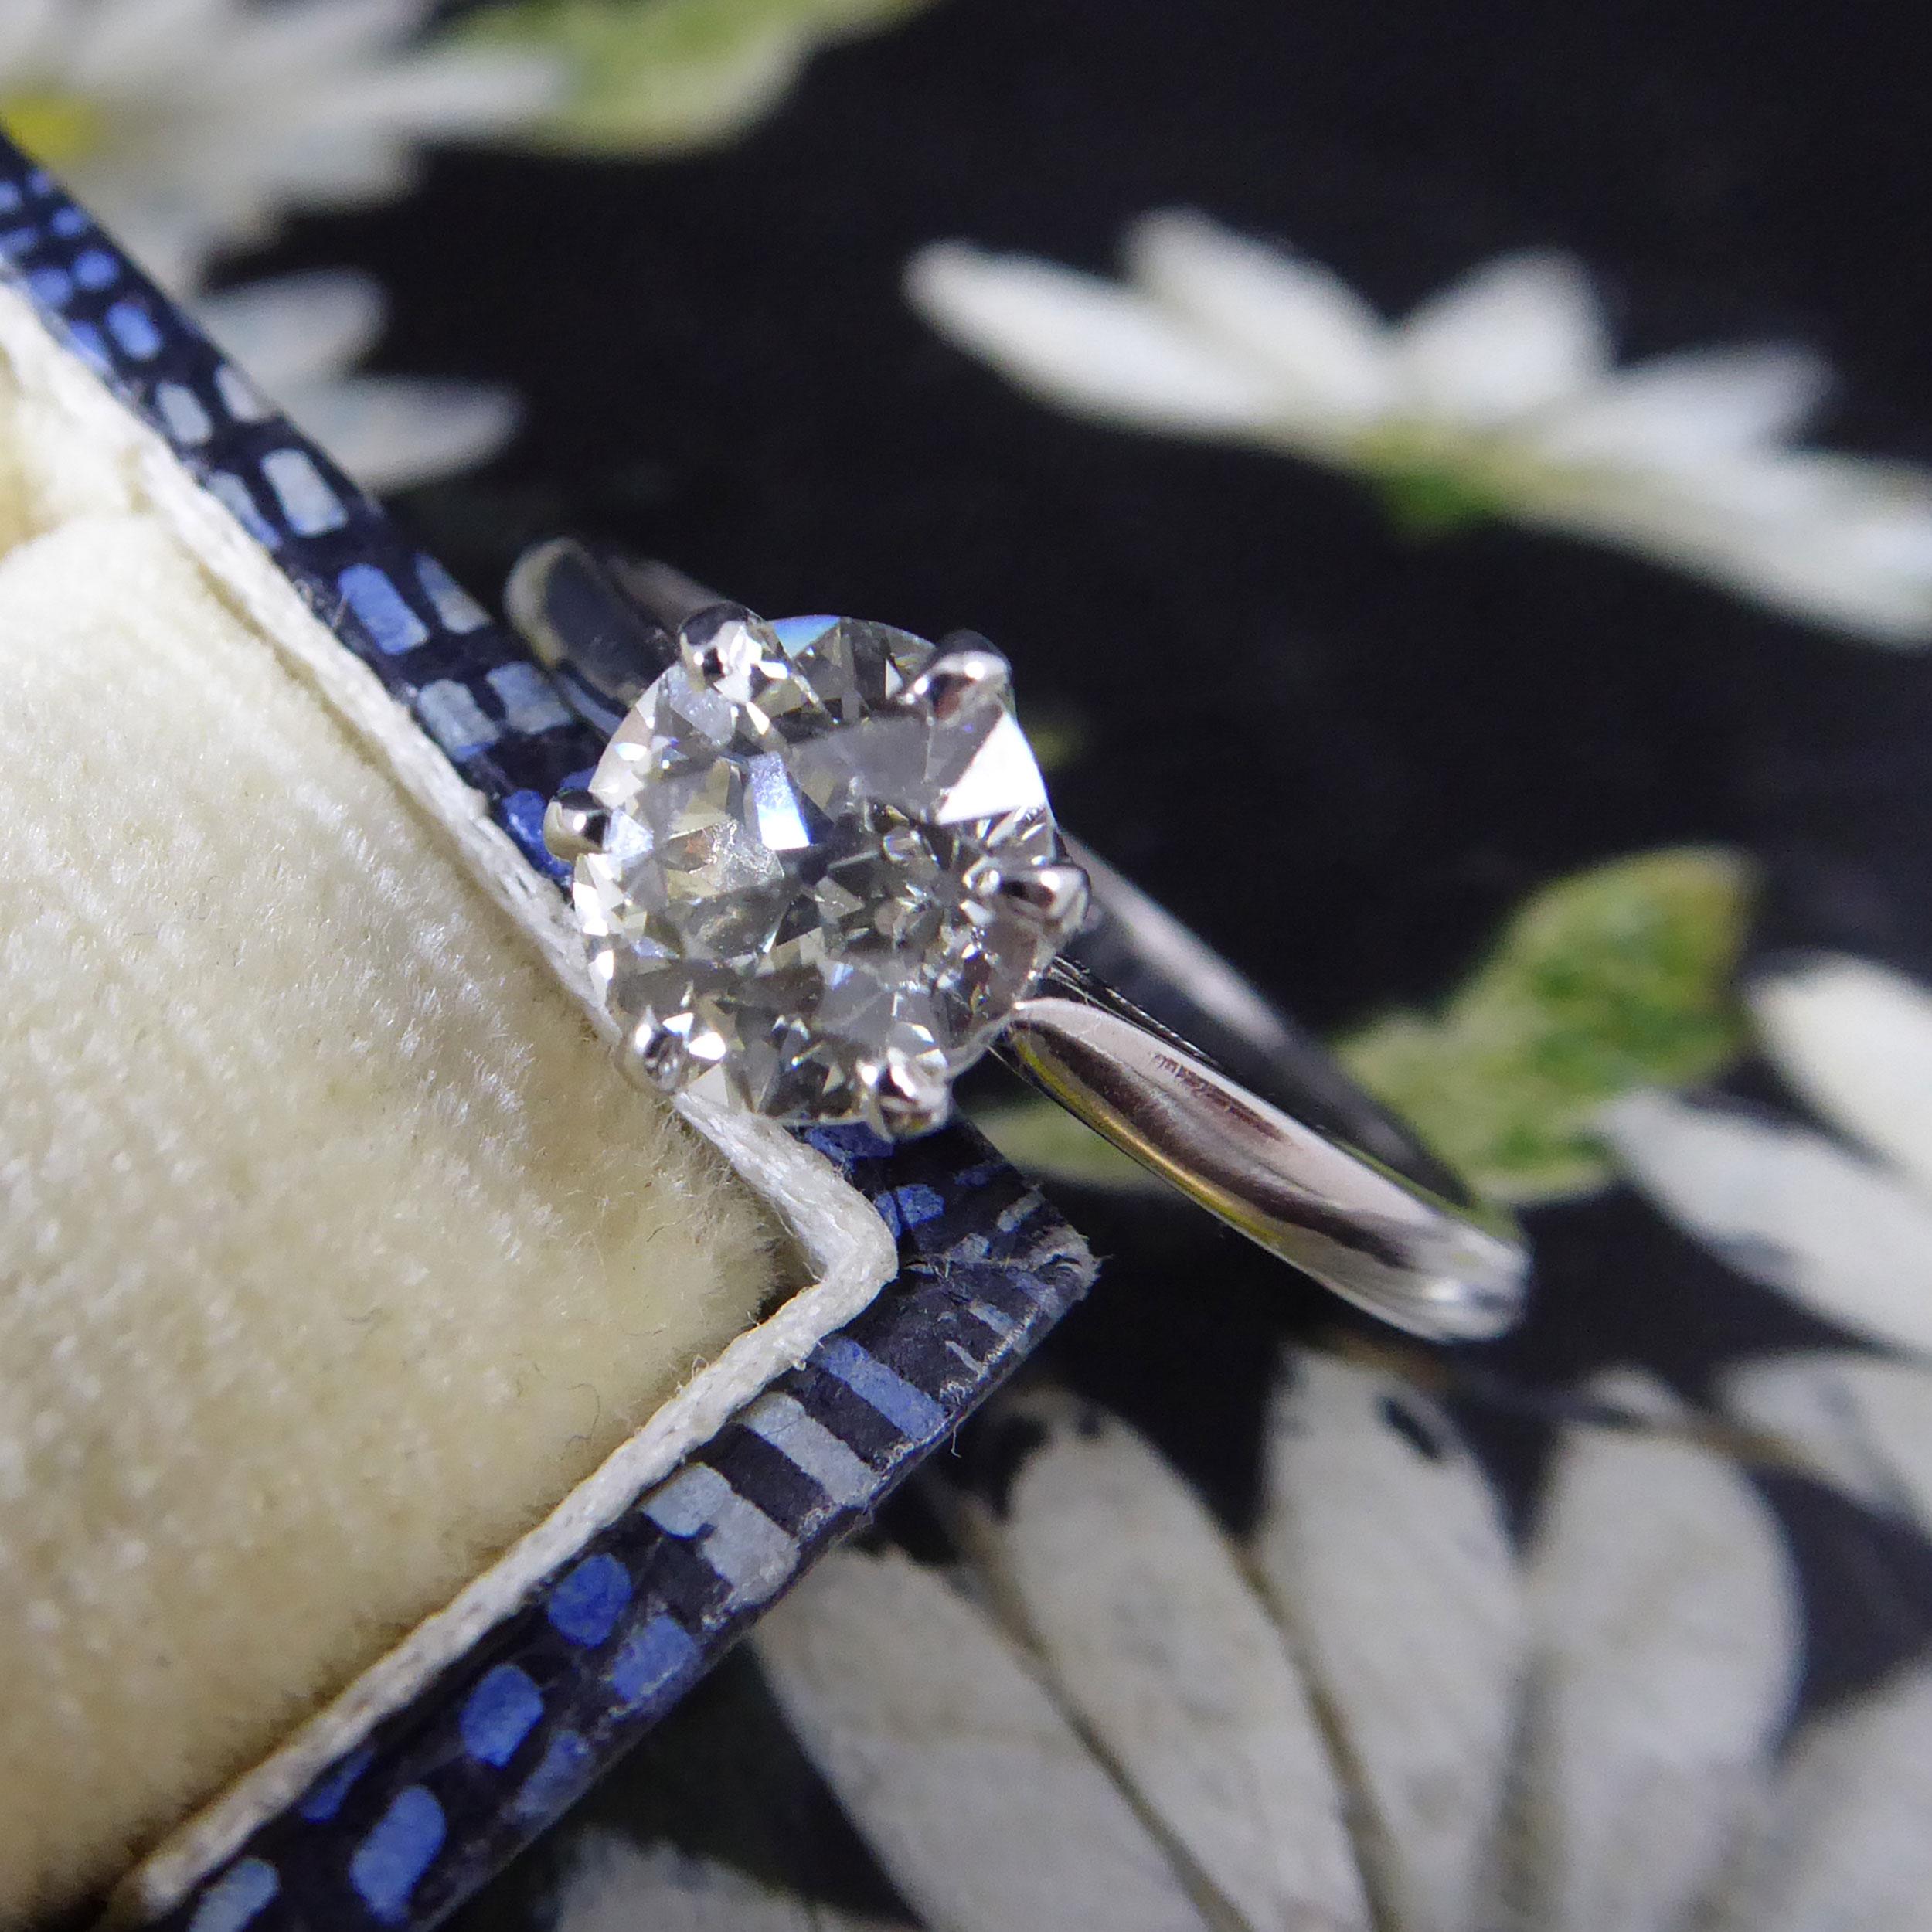 Unfortunately, as lovely though this diamond is, the ring it came in was just too worn for us to sell on.  We have, therefore, remounted the diamond in a new but traditional style ring in keeping with the design of the original.  The ring holds a